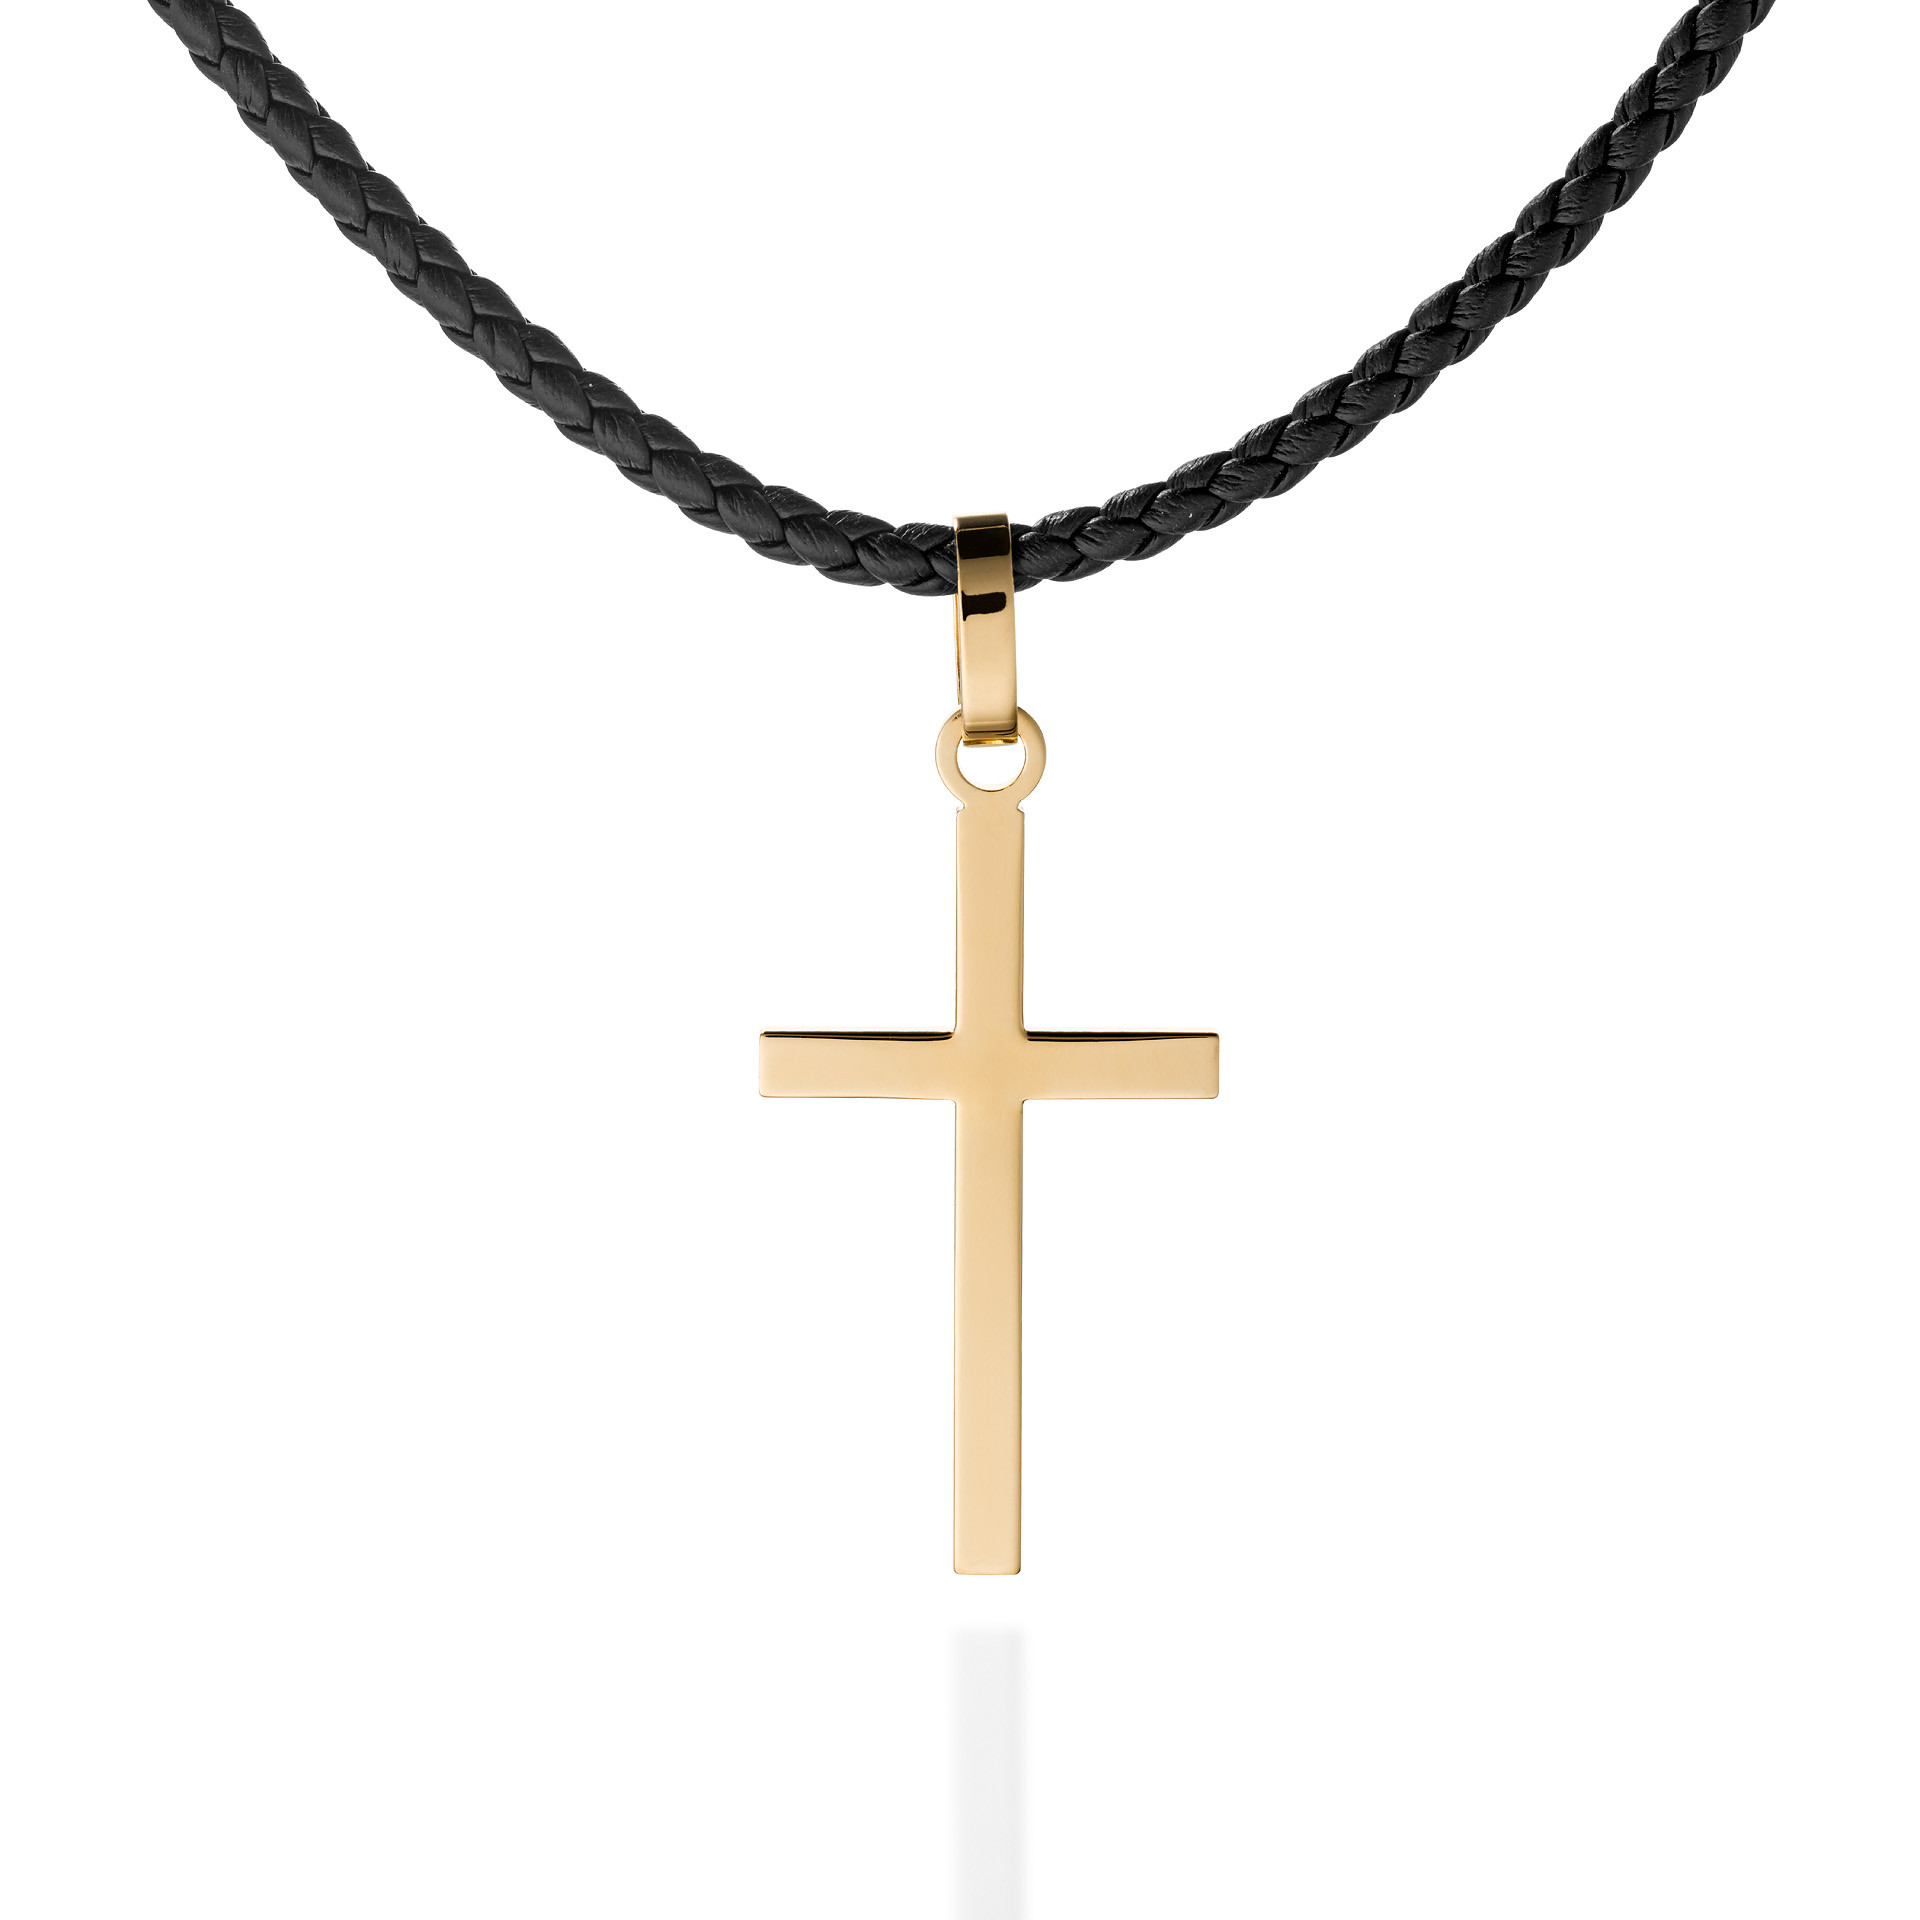 black necklace with golden cross-shaped pendant